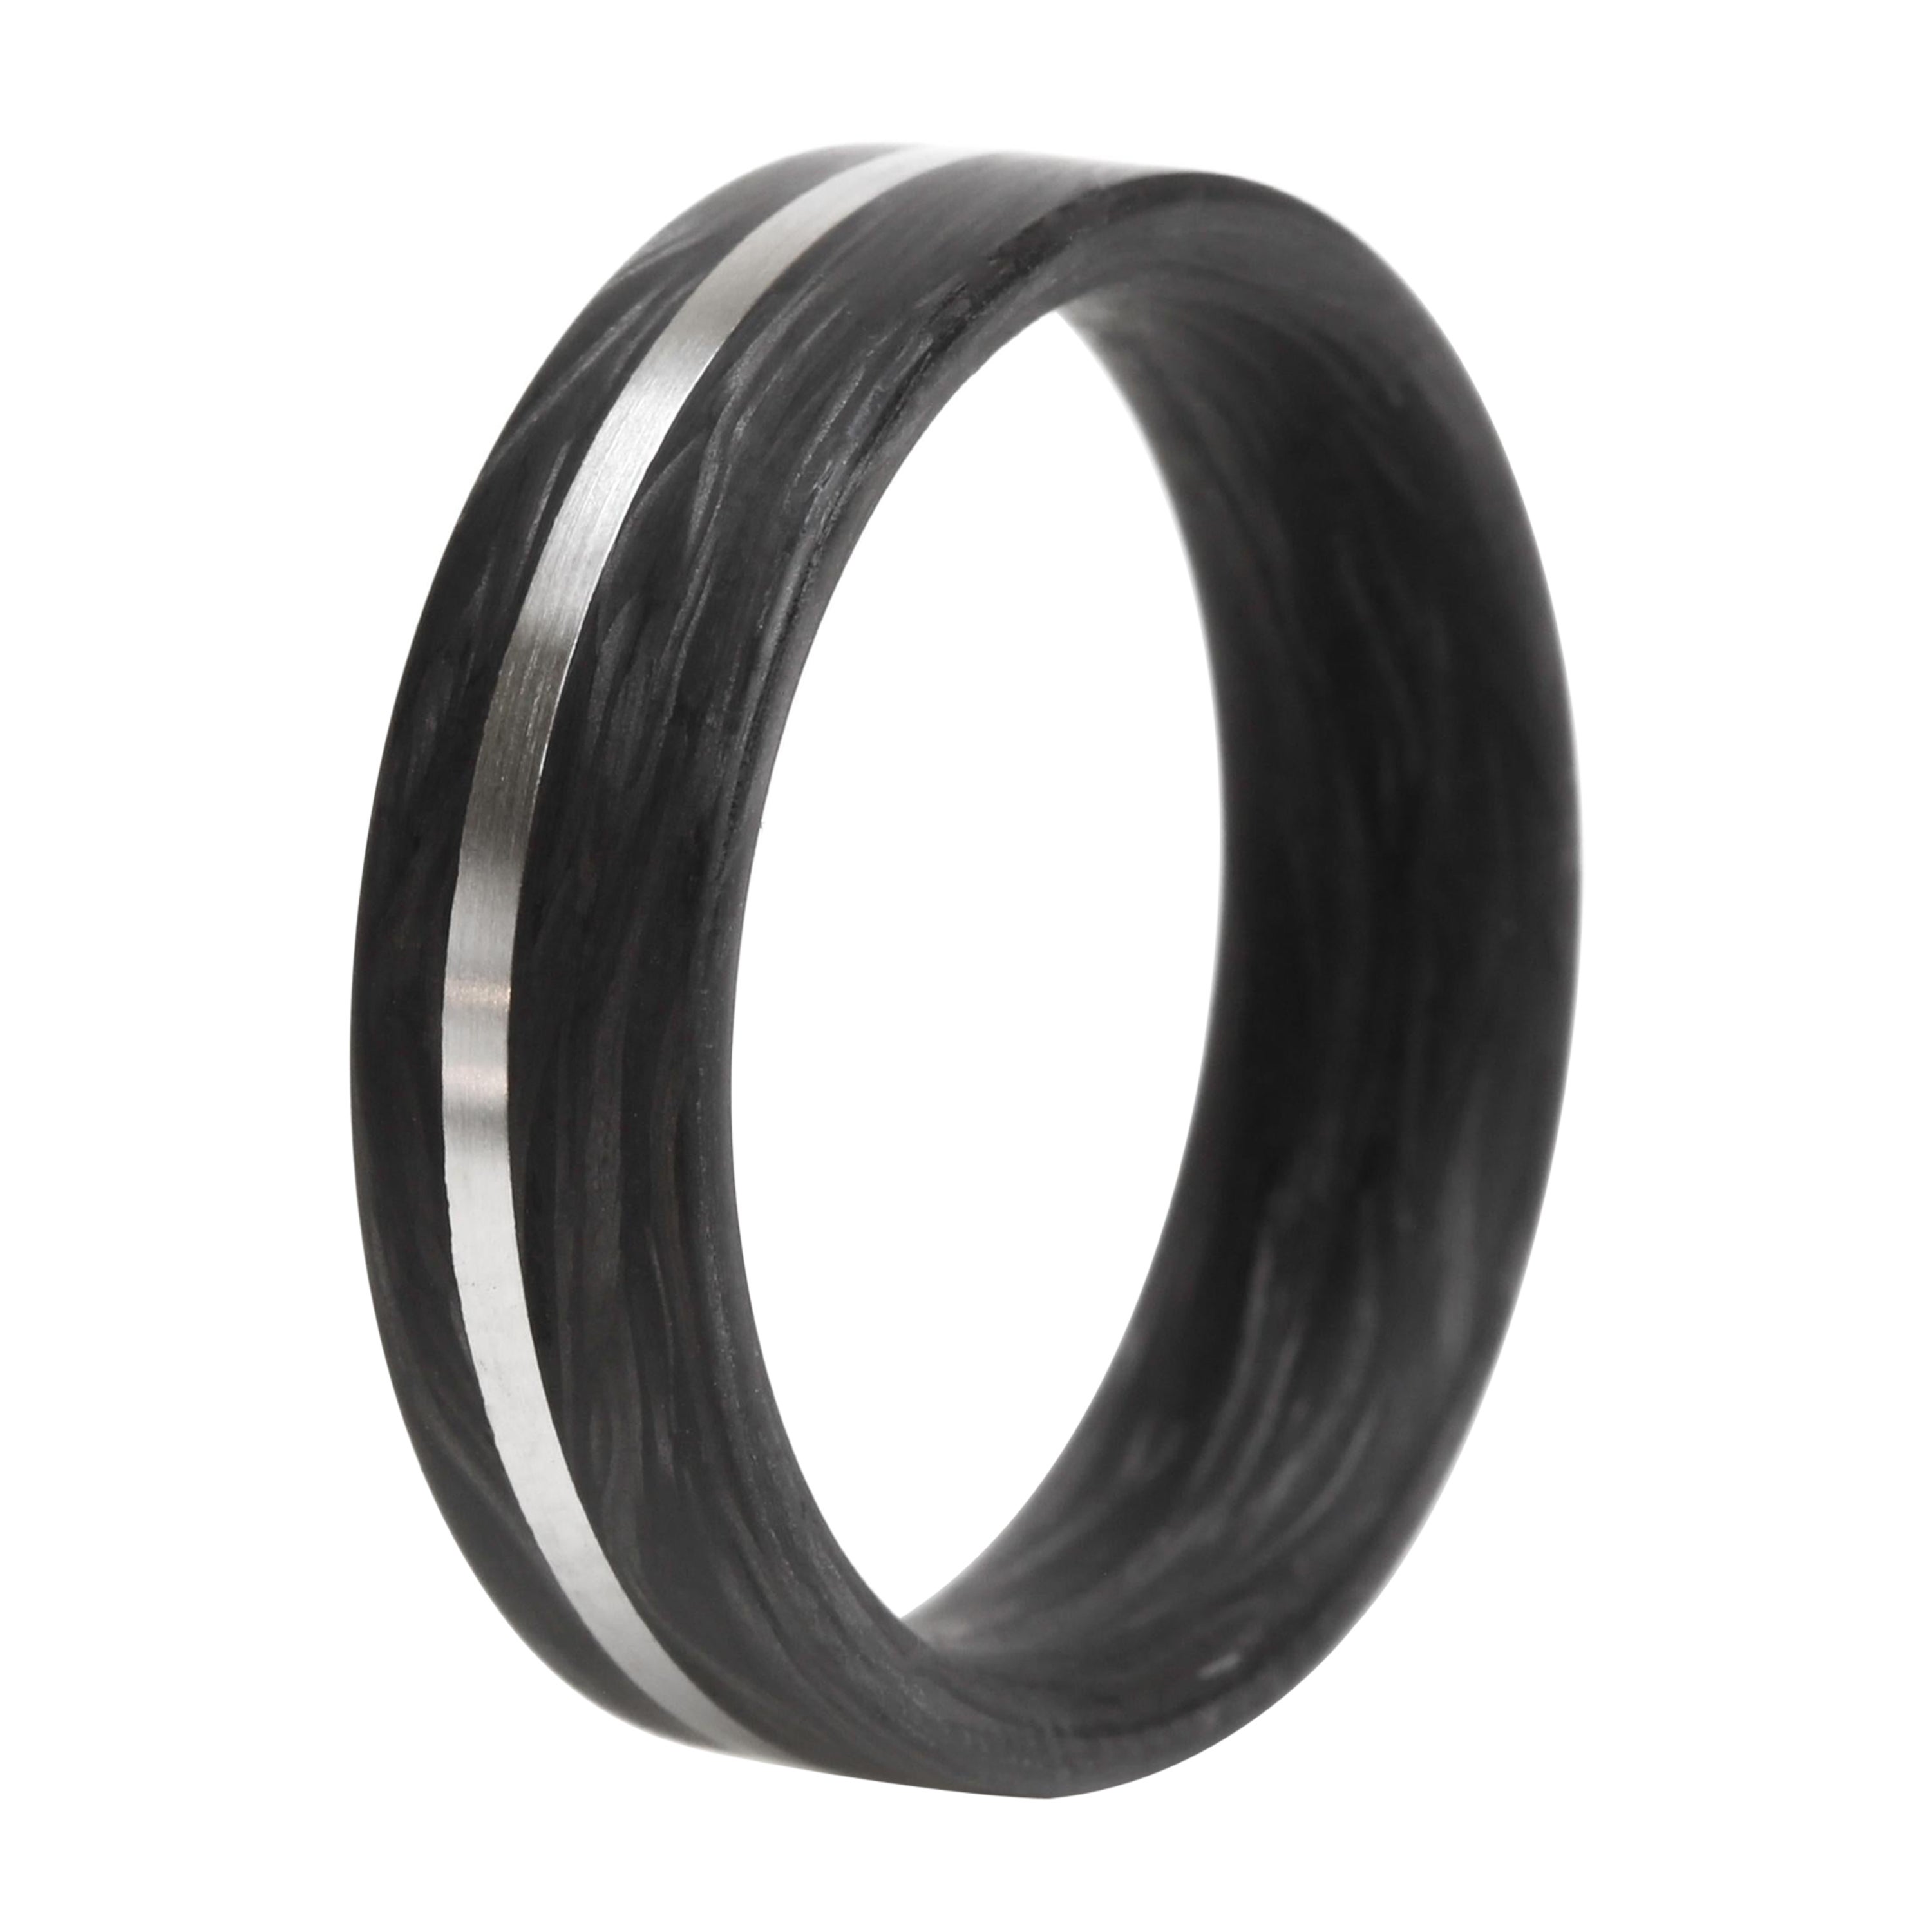 The Alton: Forged Carbon Fiber with Titanium Inlay 6mm Comfort Fit Wedding Band